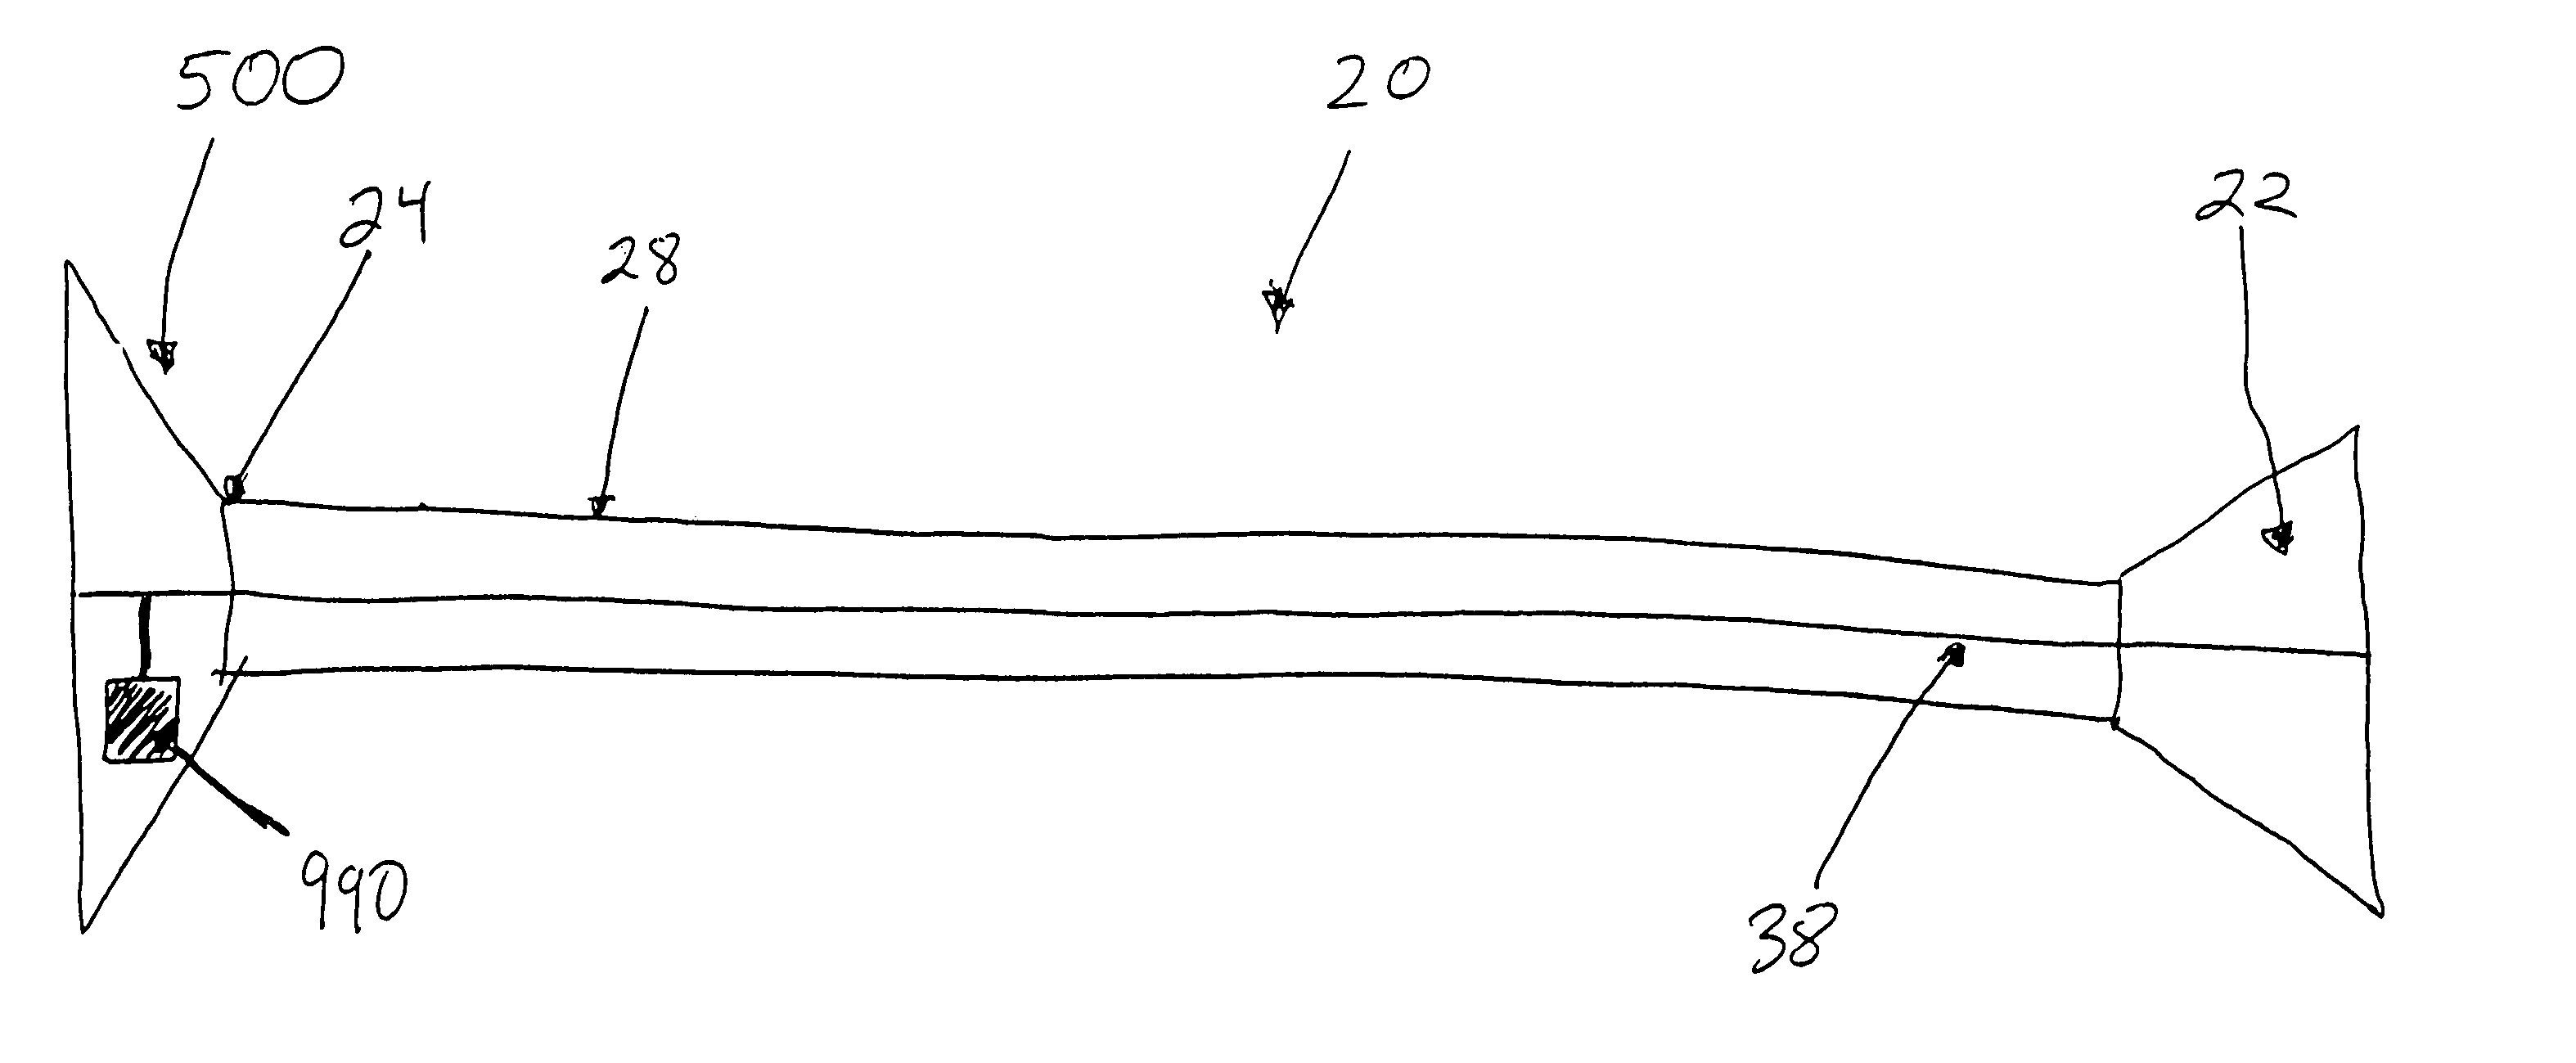 Moisture-detecting shaft for use with an electro-mechanical surgical device